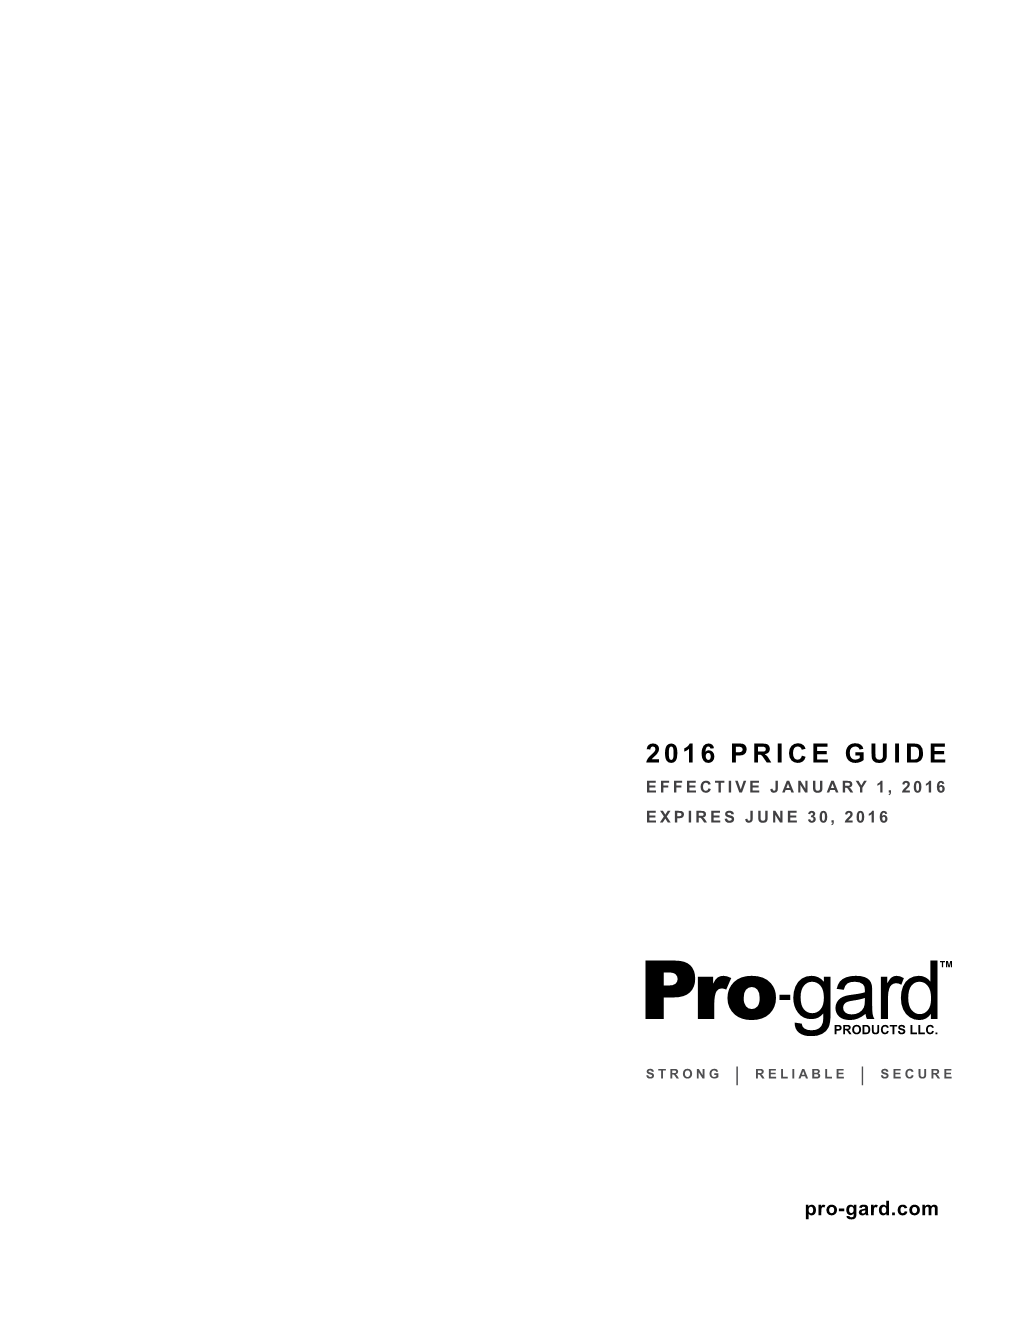 2016 Price Guide Effective January 1, 2016 EXPIRES June 30, 2016